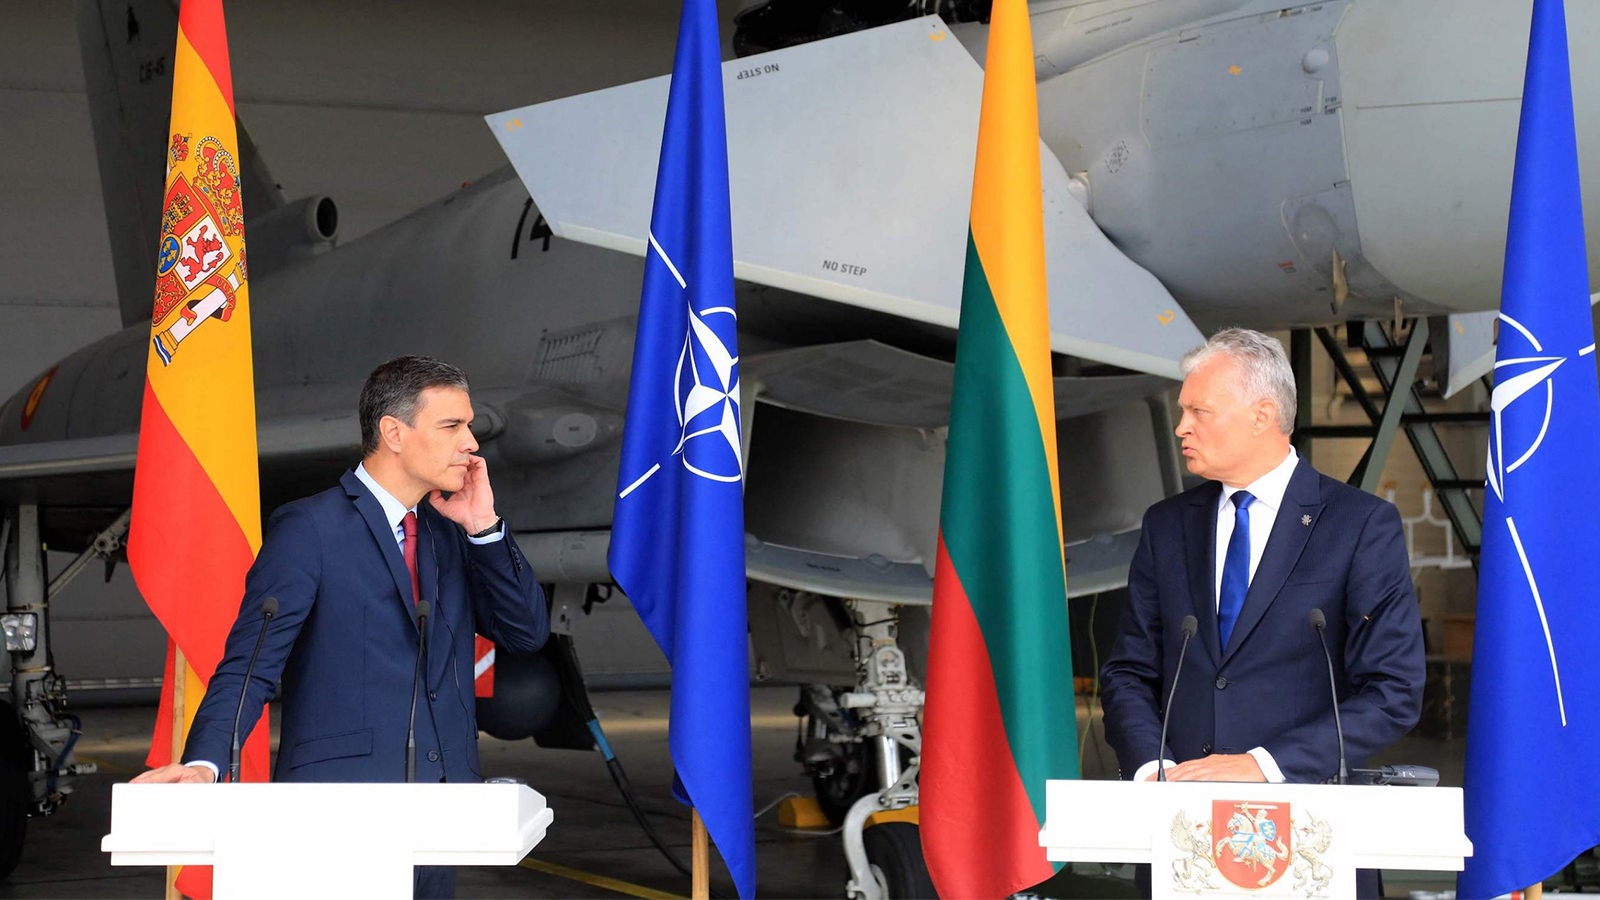 Fighter jets scramble interrupt leaders in Lithuania